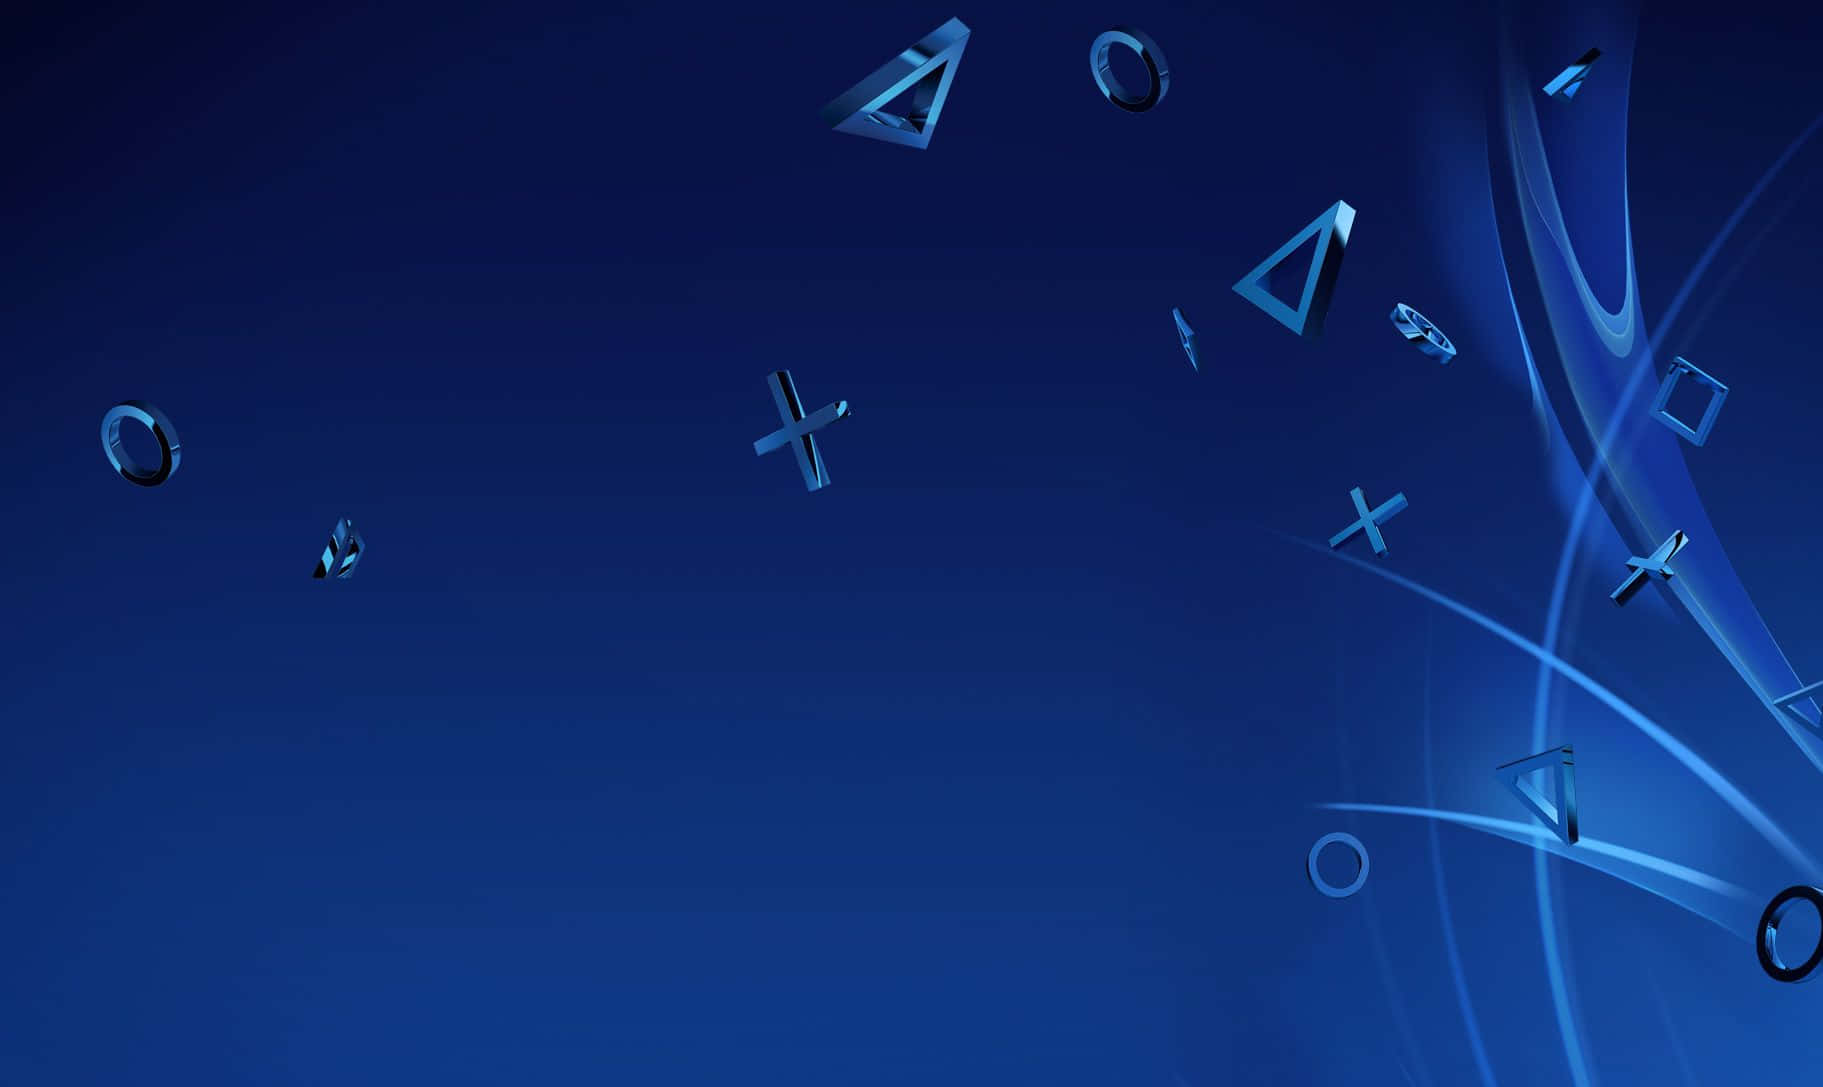 Free Ps4 Theme Wallpaper Downloads, [100+] Ps4 Theme Wallpapers for FREE |  